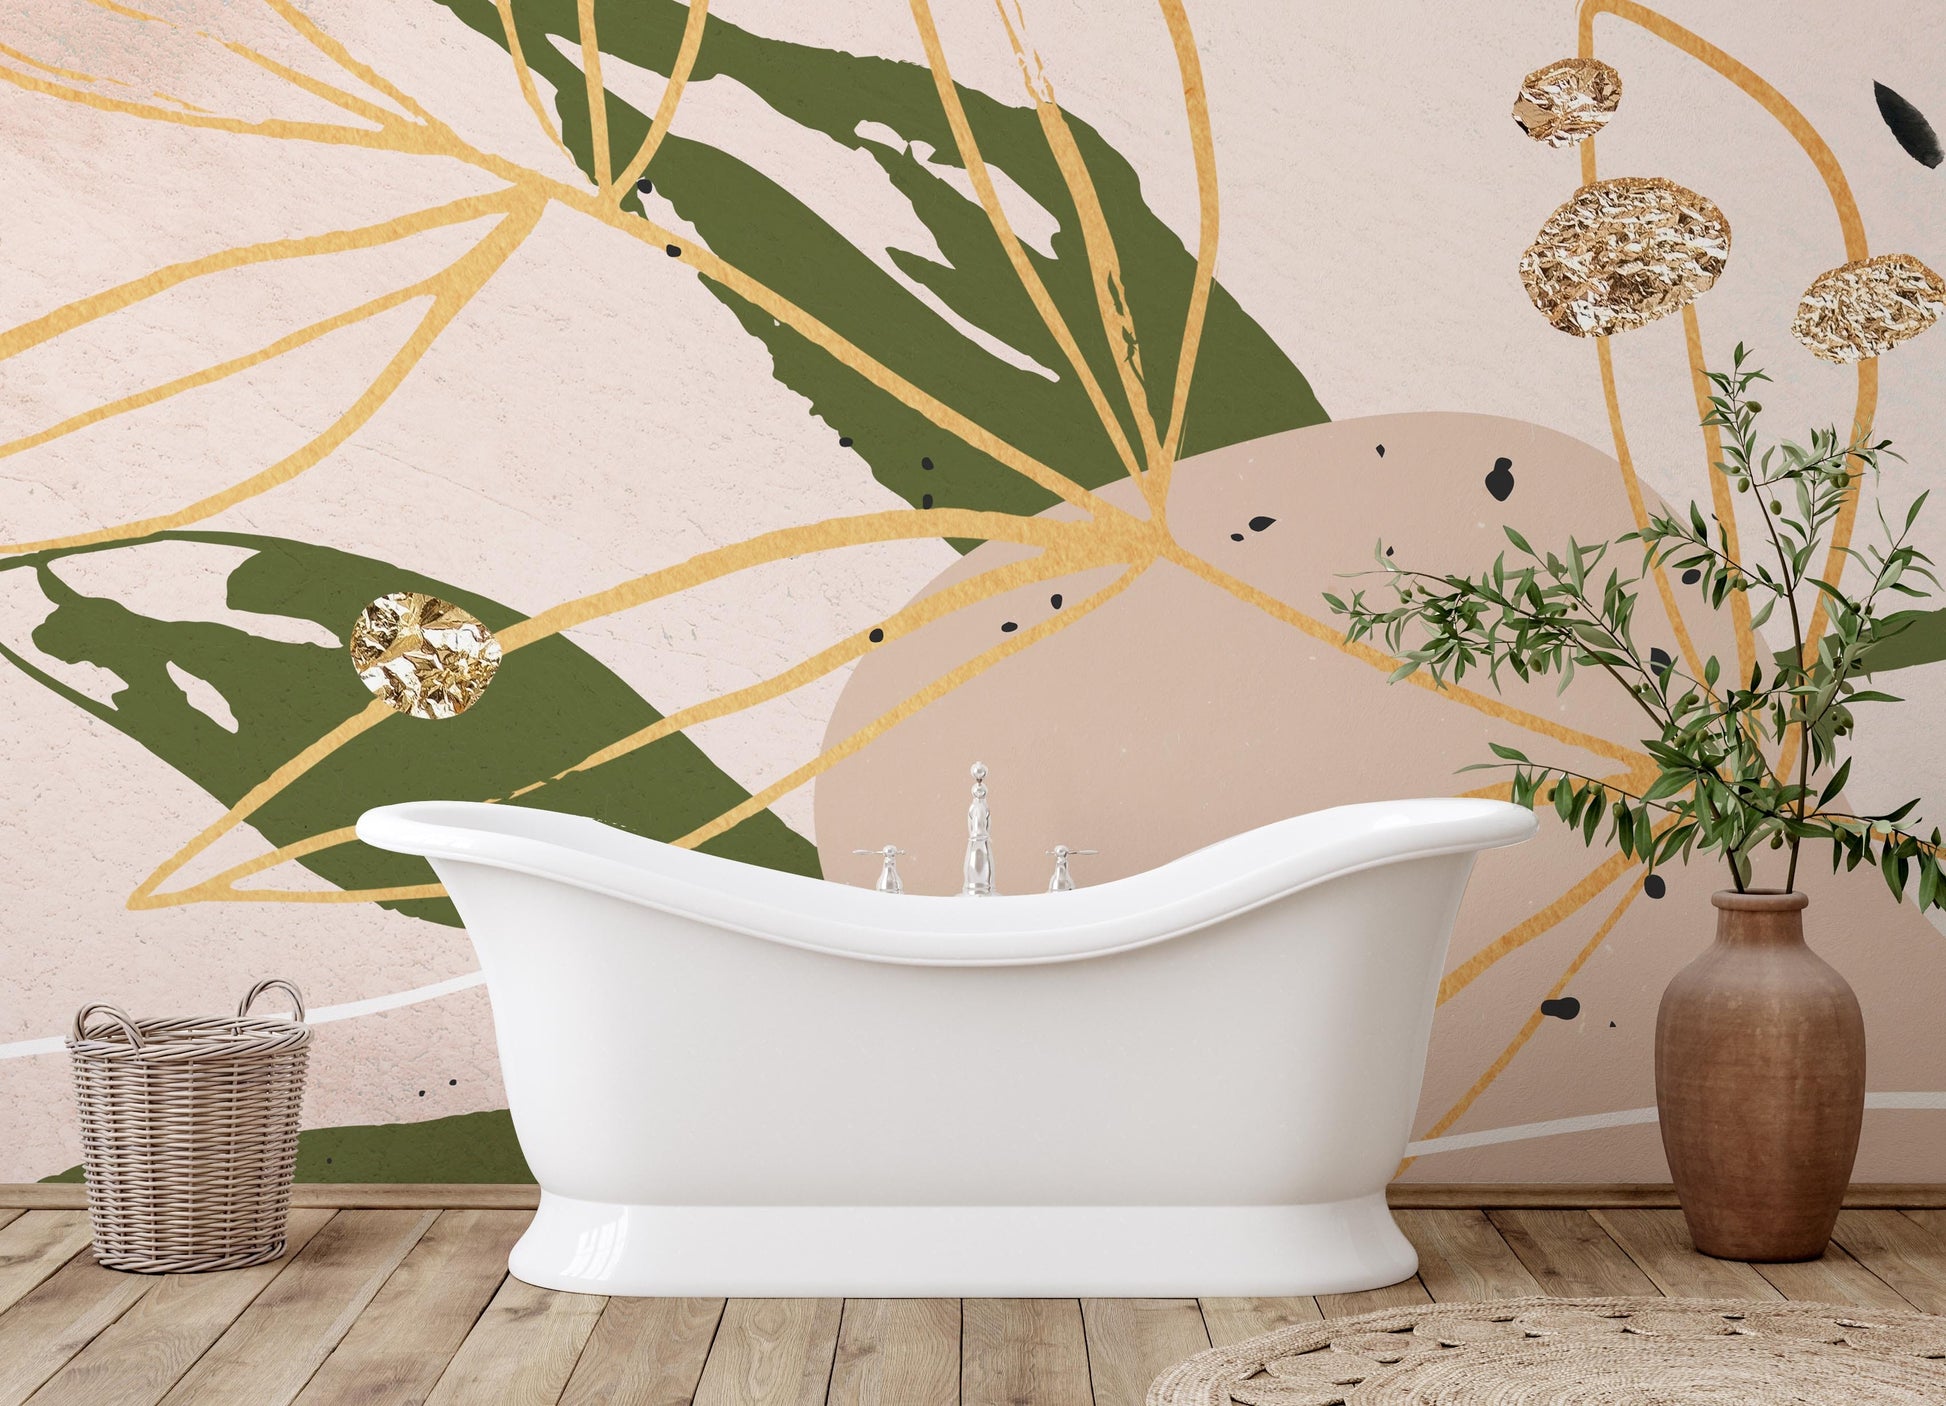 Wallpaper mural for the bathroom with a golden linier and ivy leaves.